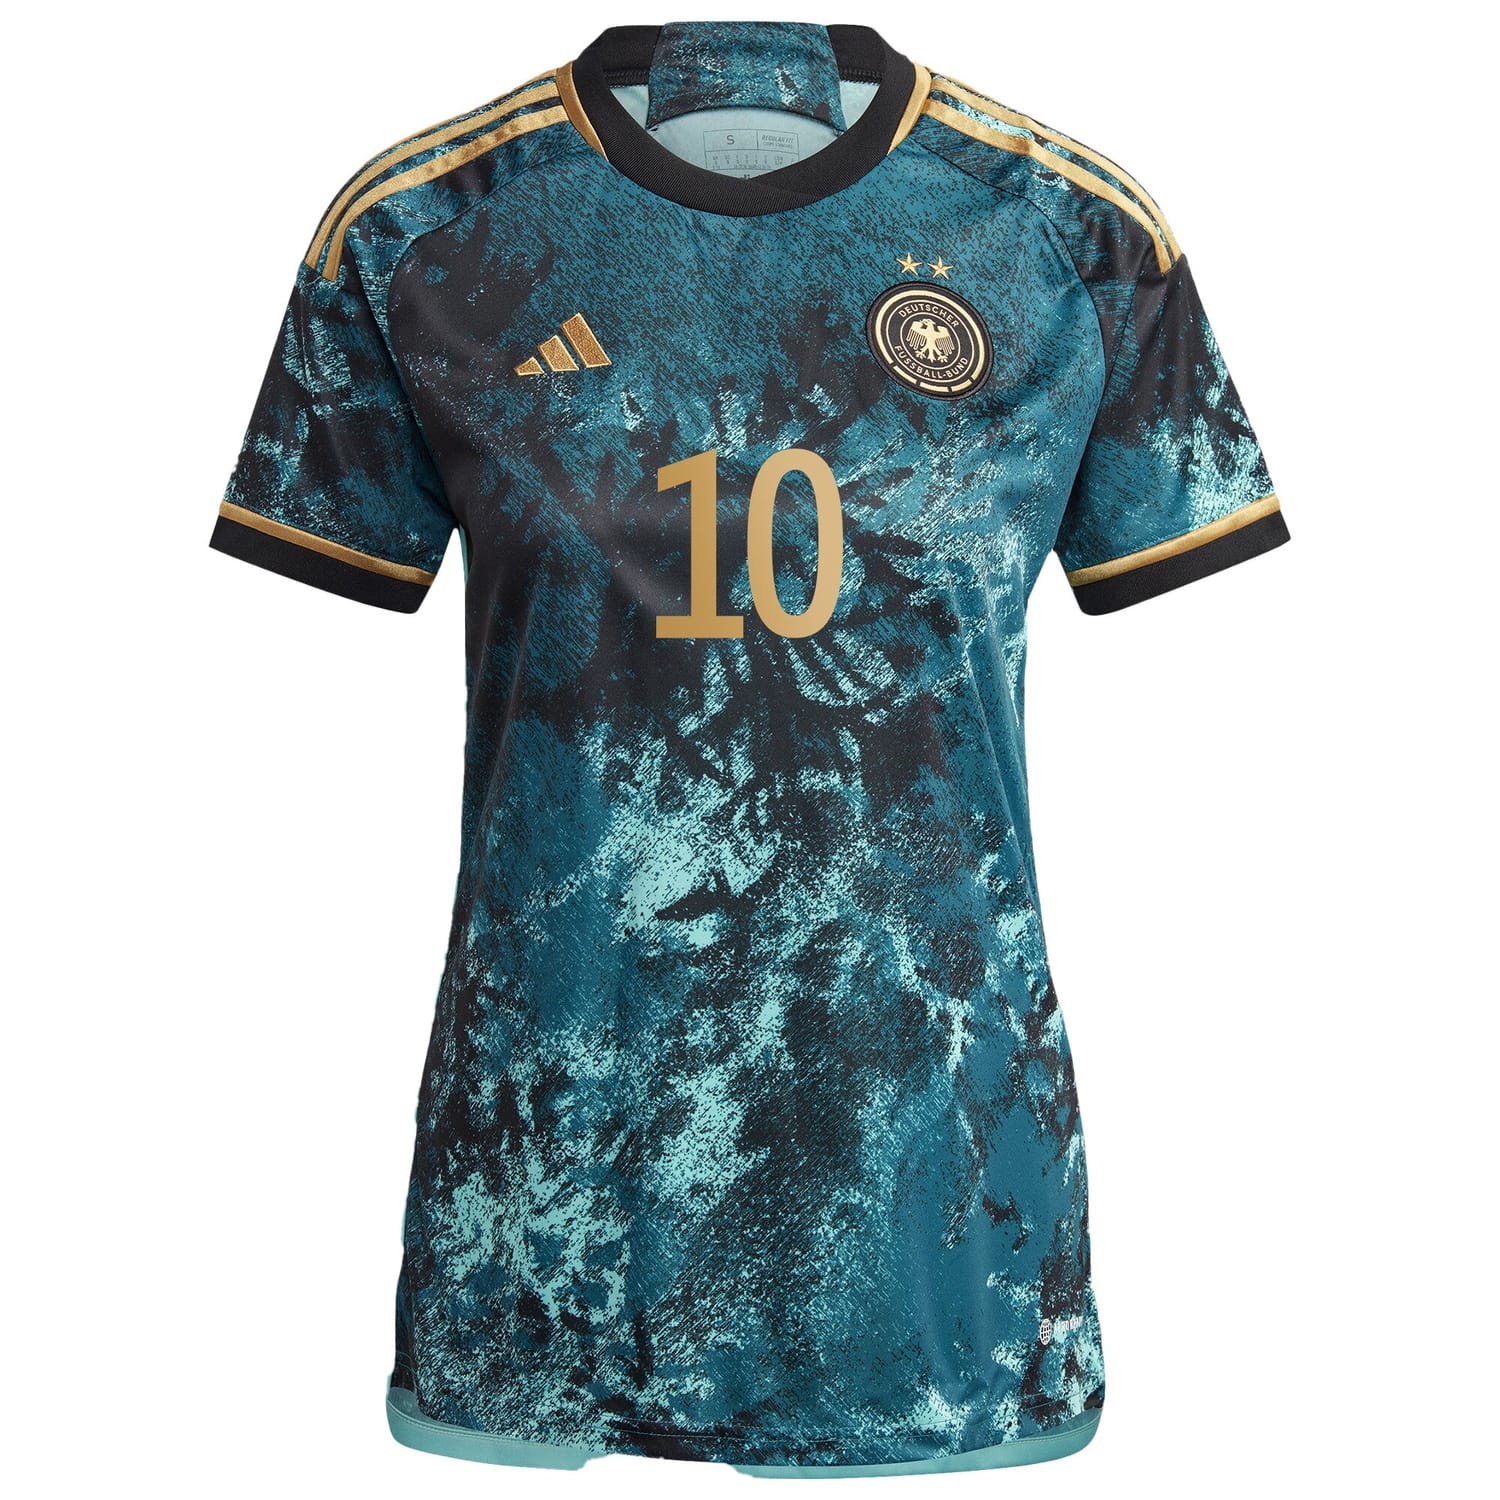 Germany National Team Away Jersey Shirt 2023 player Laura Freigang 10 printing for Women